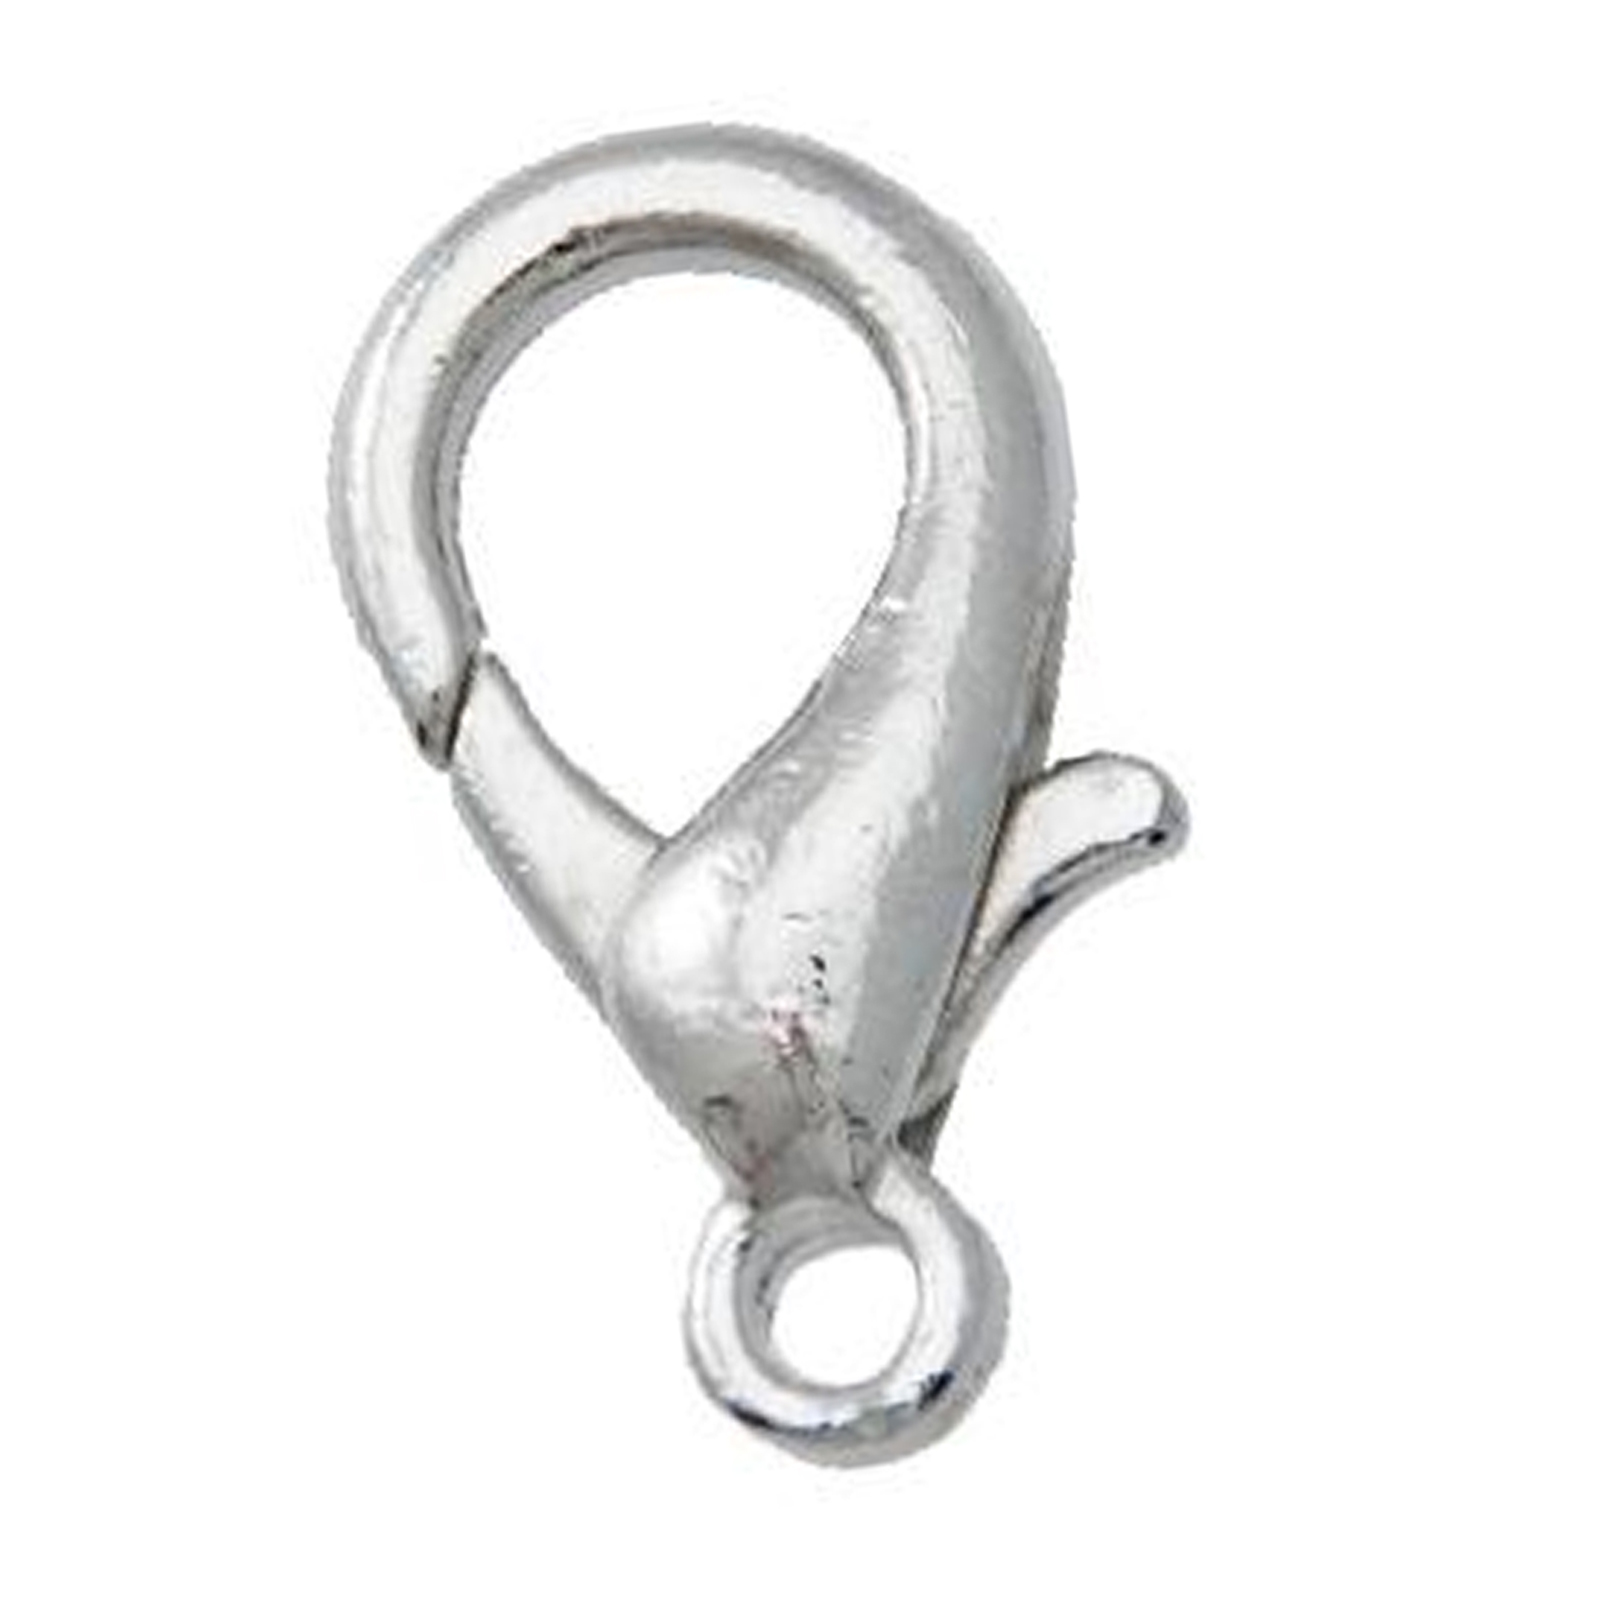 Decorative Jewelry Clasps 23x13mm Large Trigger Clasps - Silver